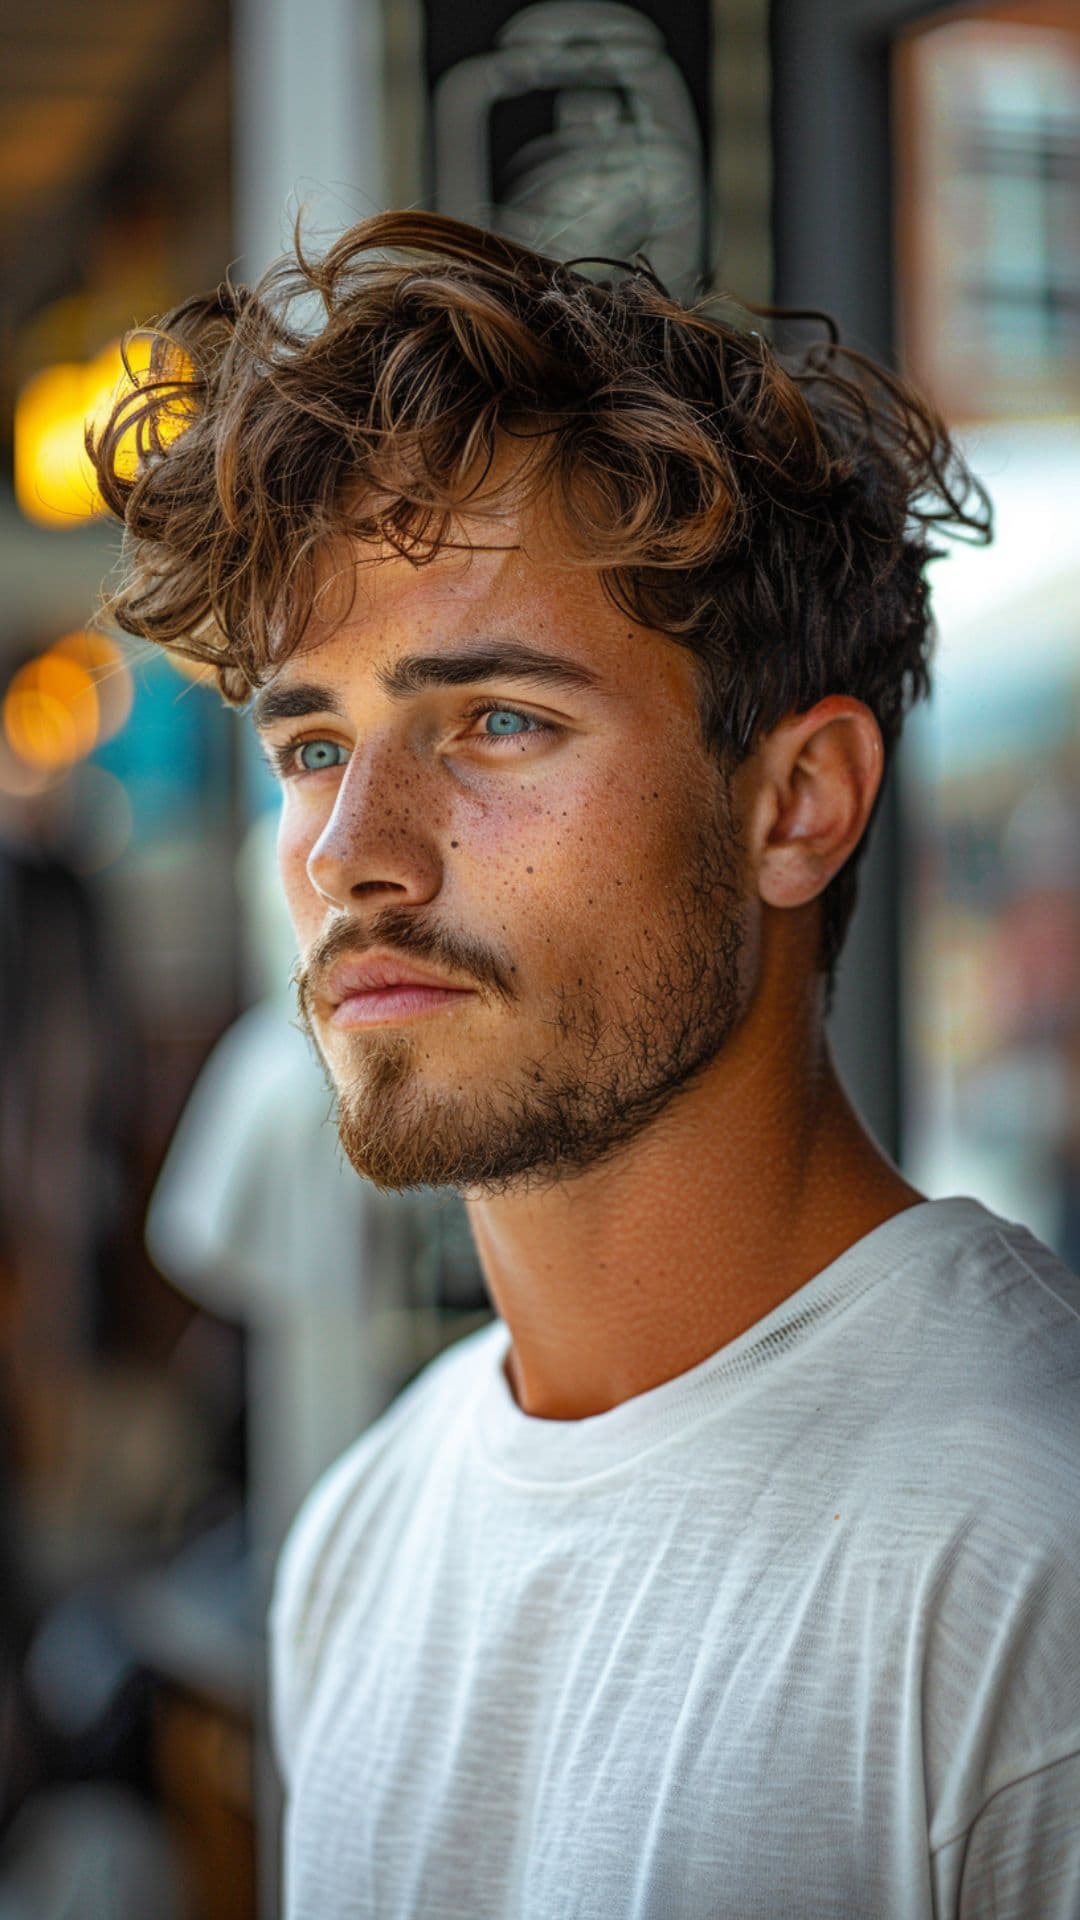 A man modelling a short and messy hair.